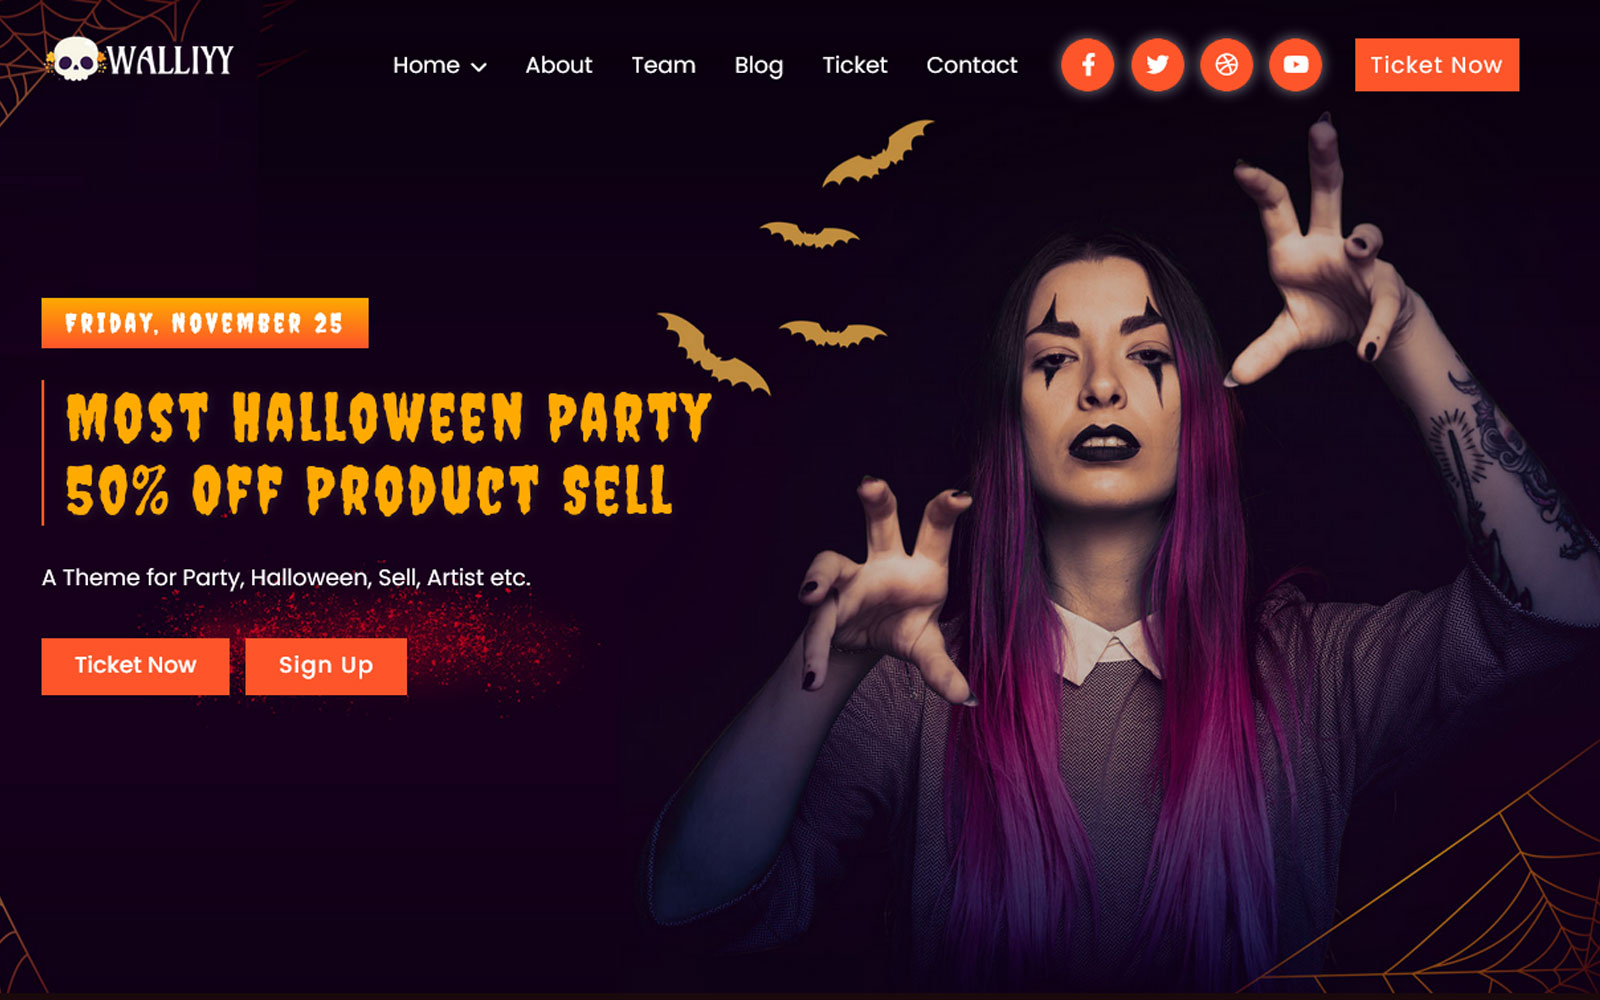 Walliyy - Halloween Event & Party Html5 Landing Page Template